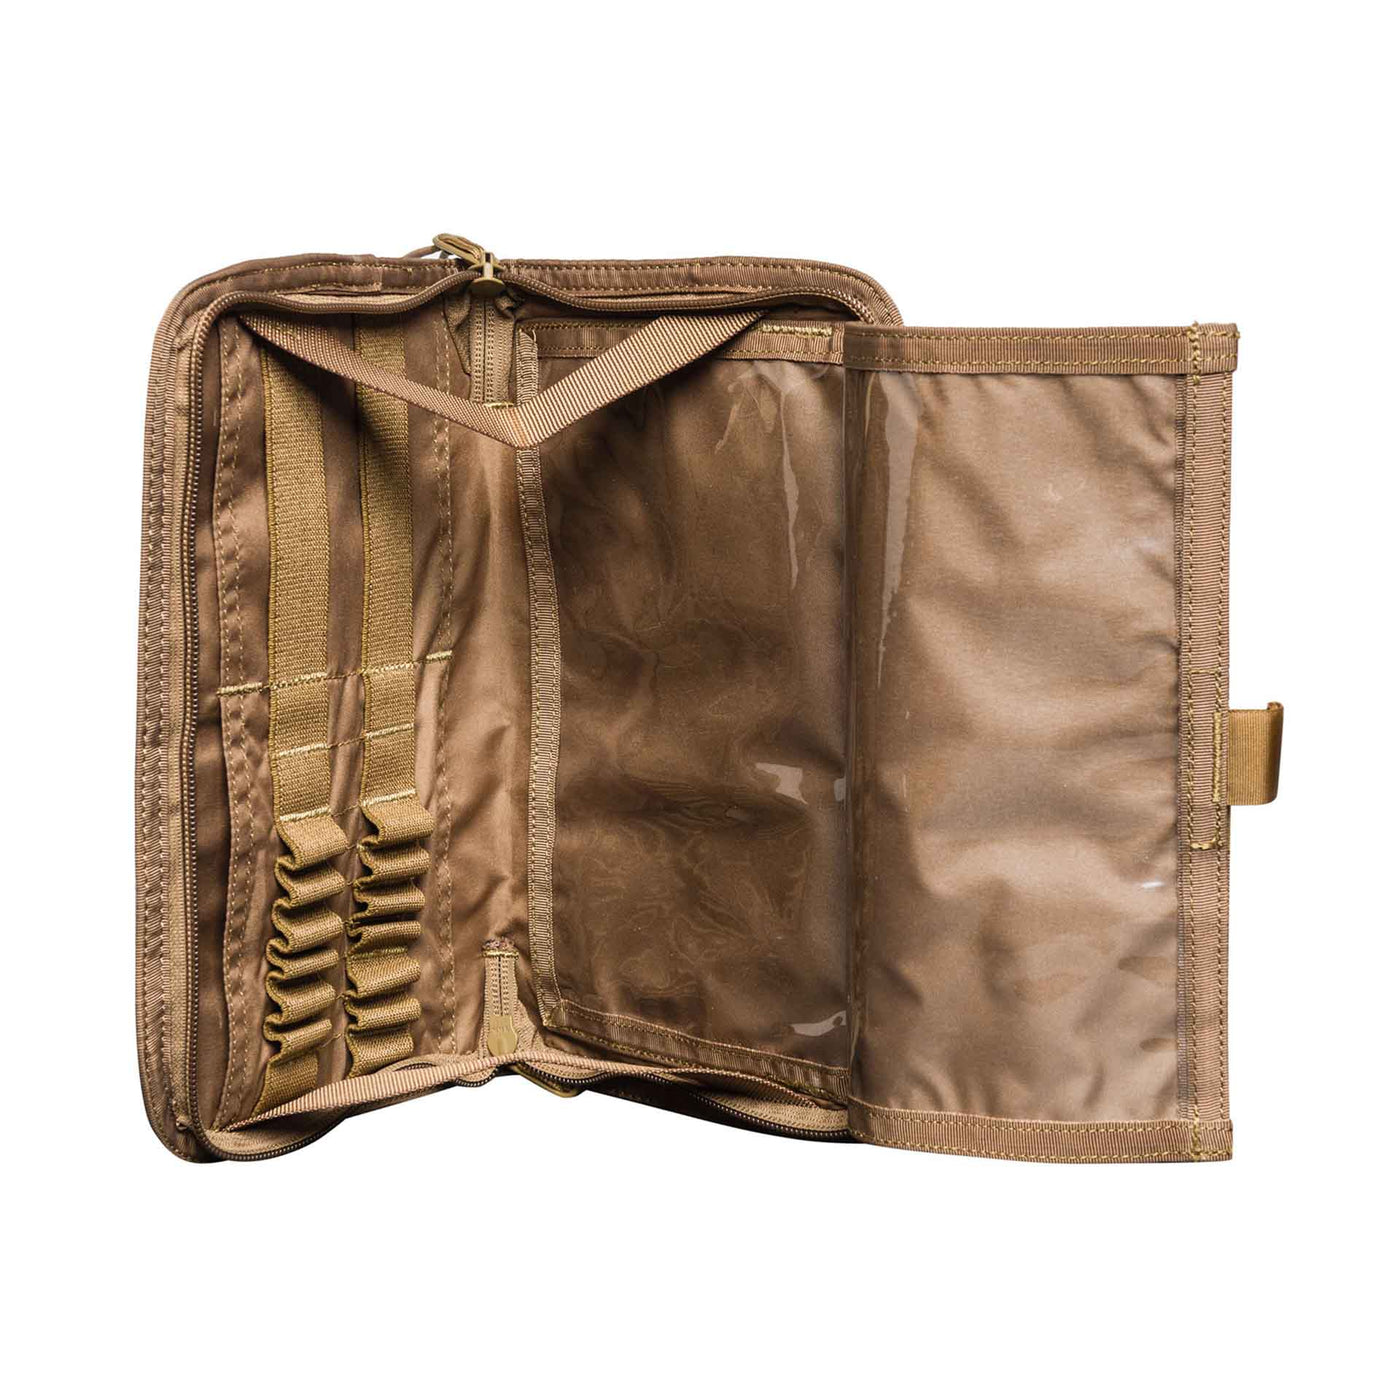 Tactical Organizer Pouch with MOLLE system coyete open